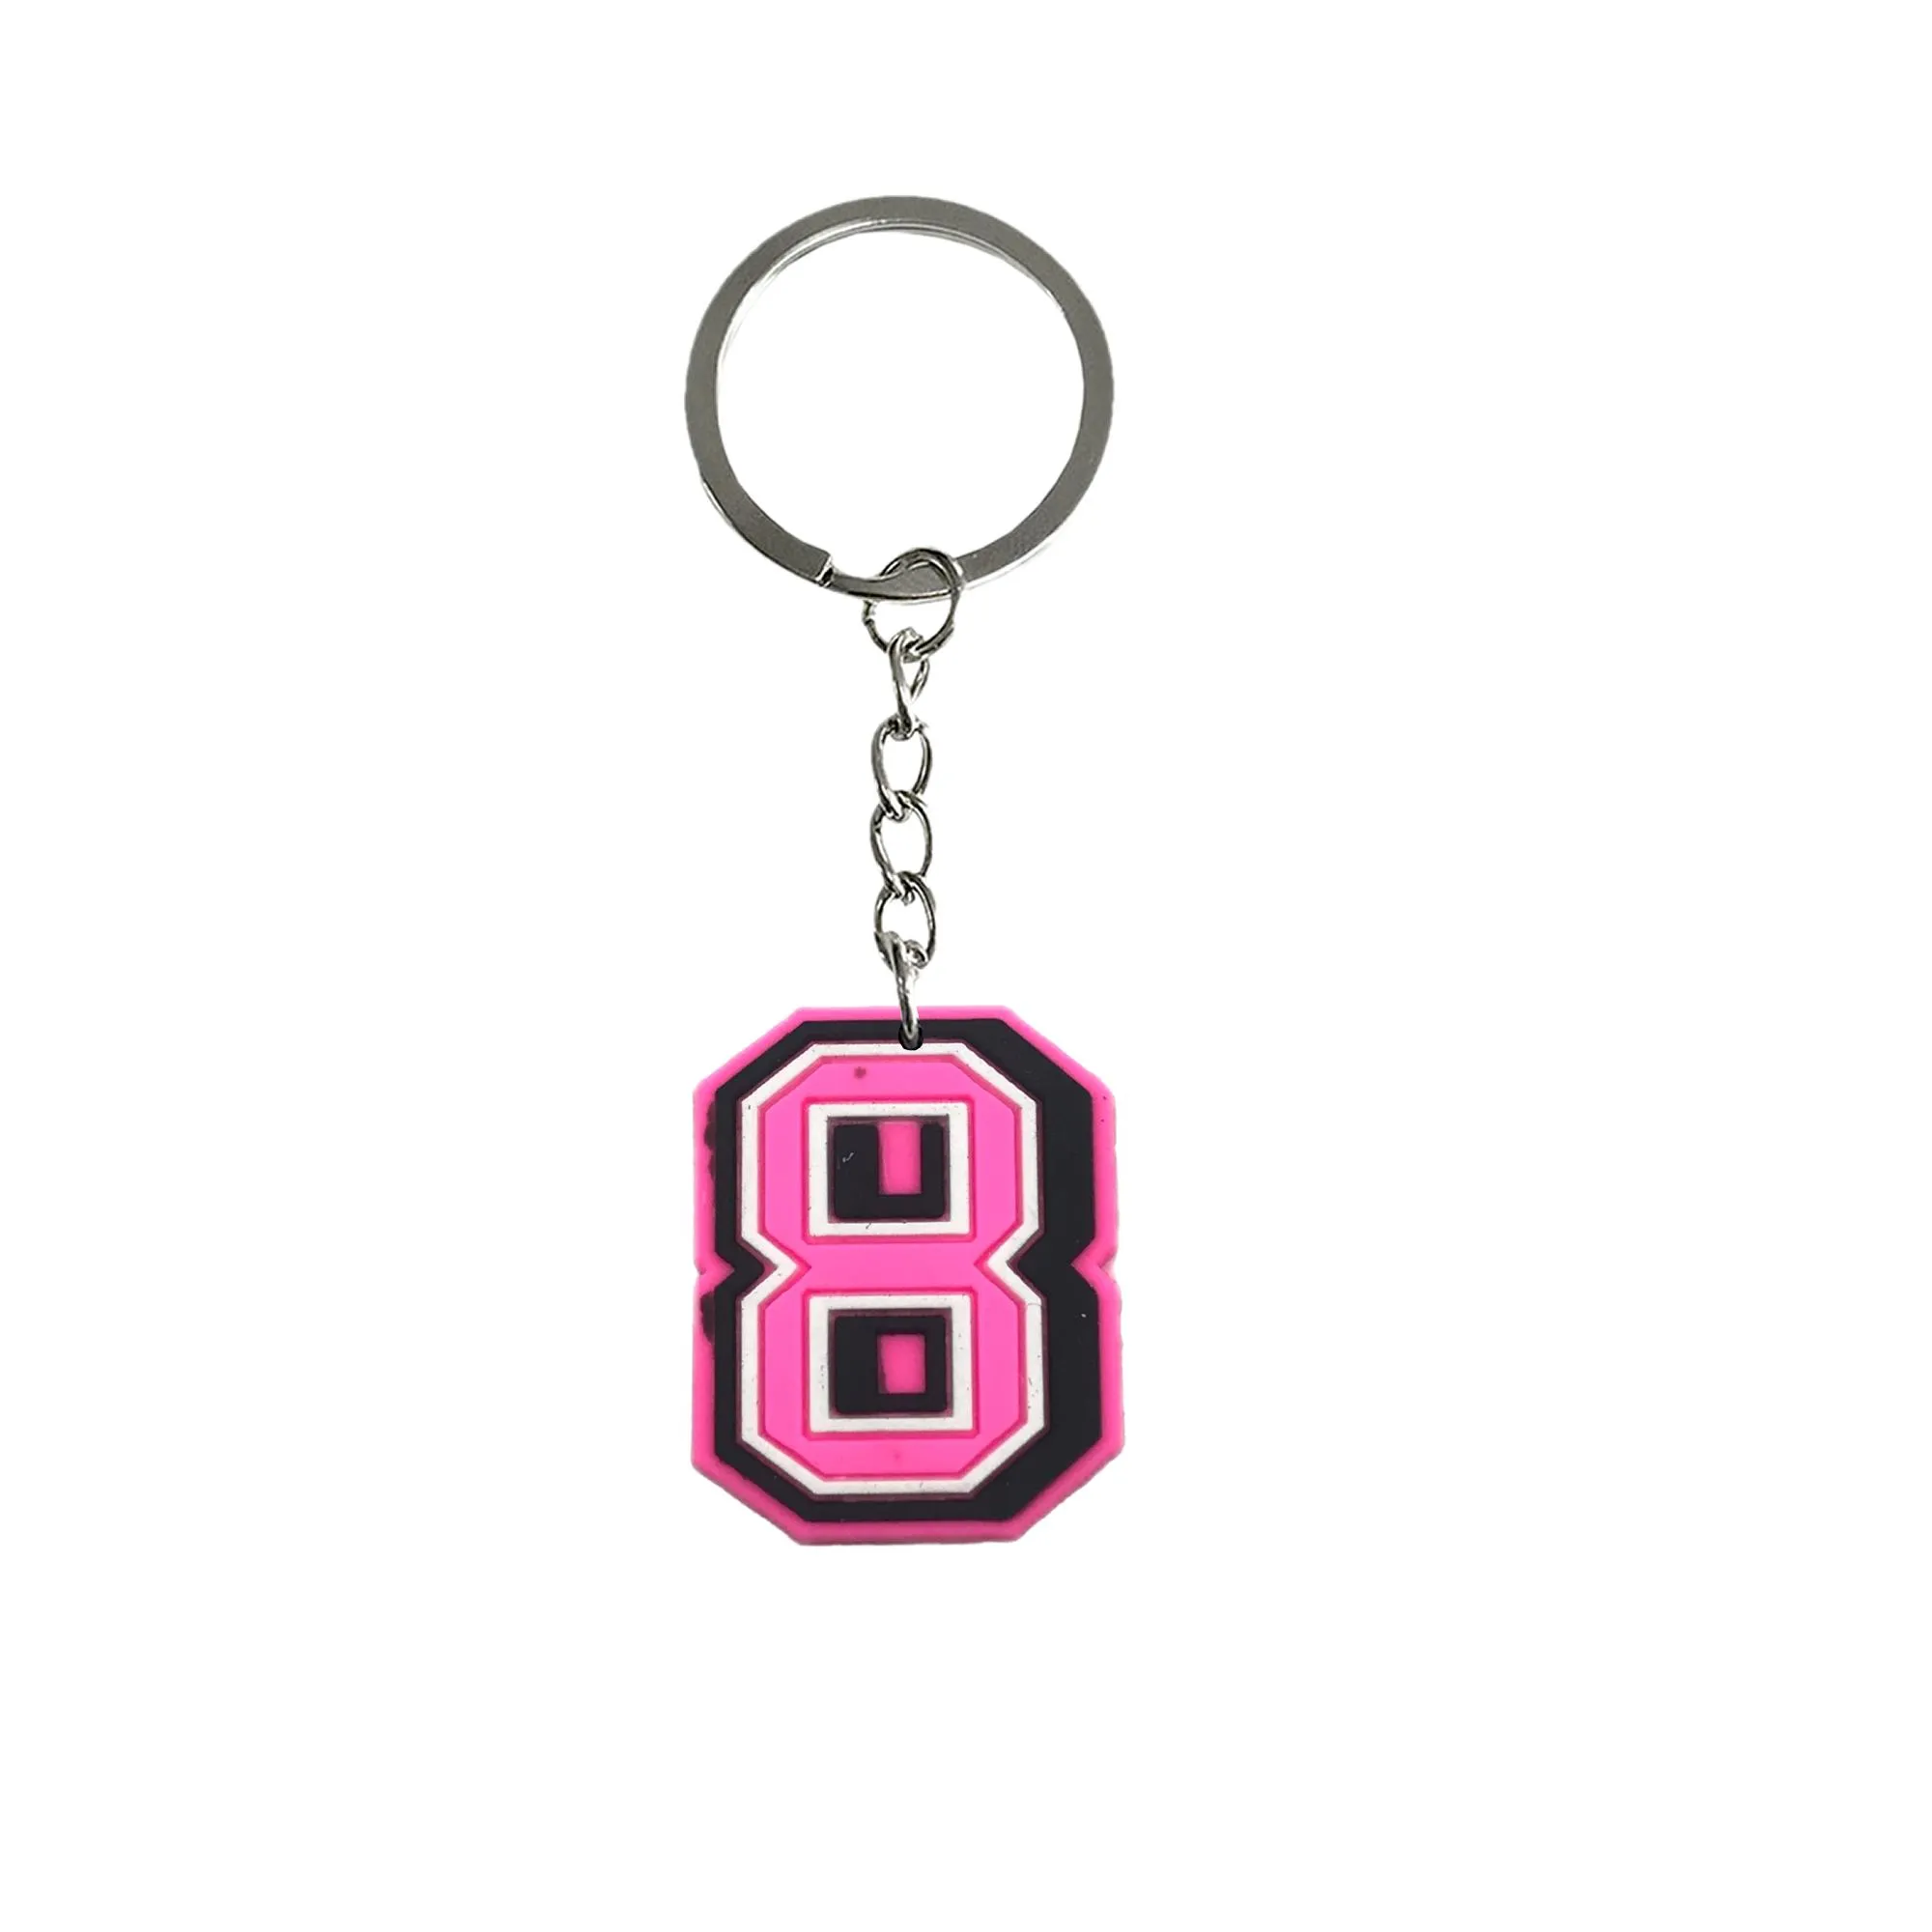 pink number keychain for classroom prizes key chain party favors gift birthday christmas keyring suitable schoolbag keychains goodie bag stuffers supplies kids